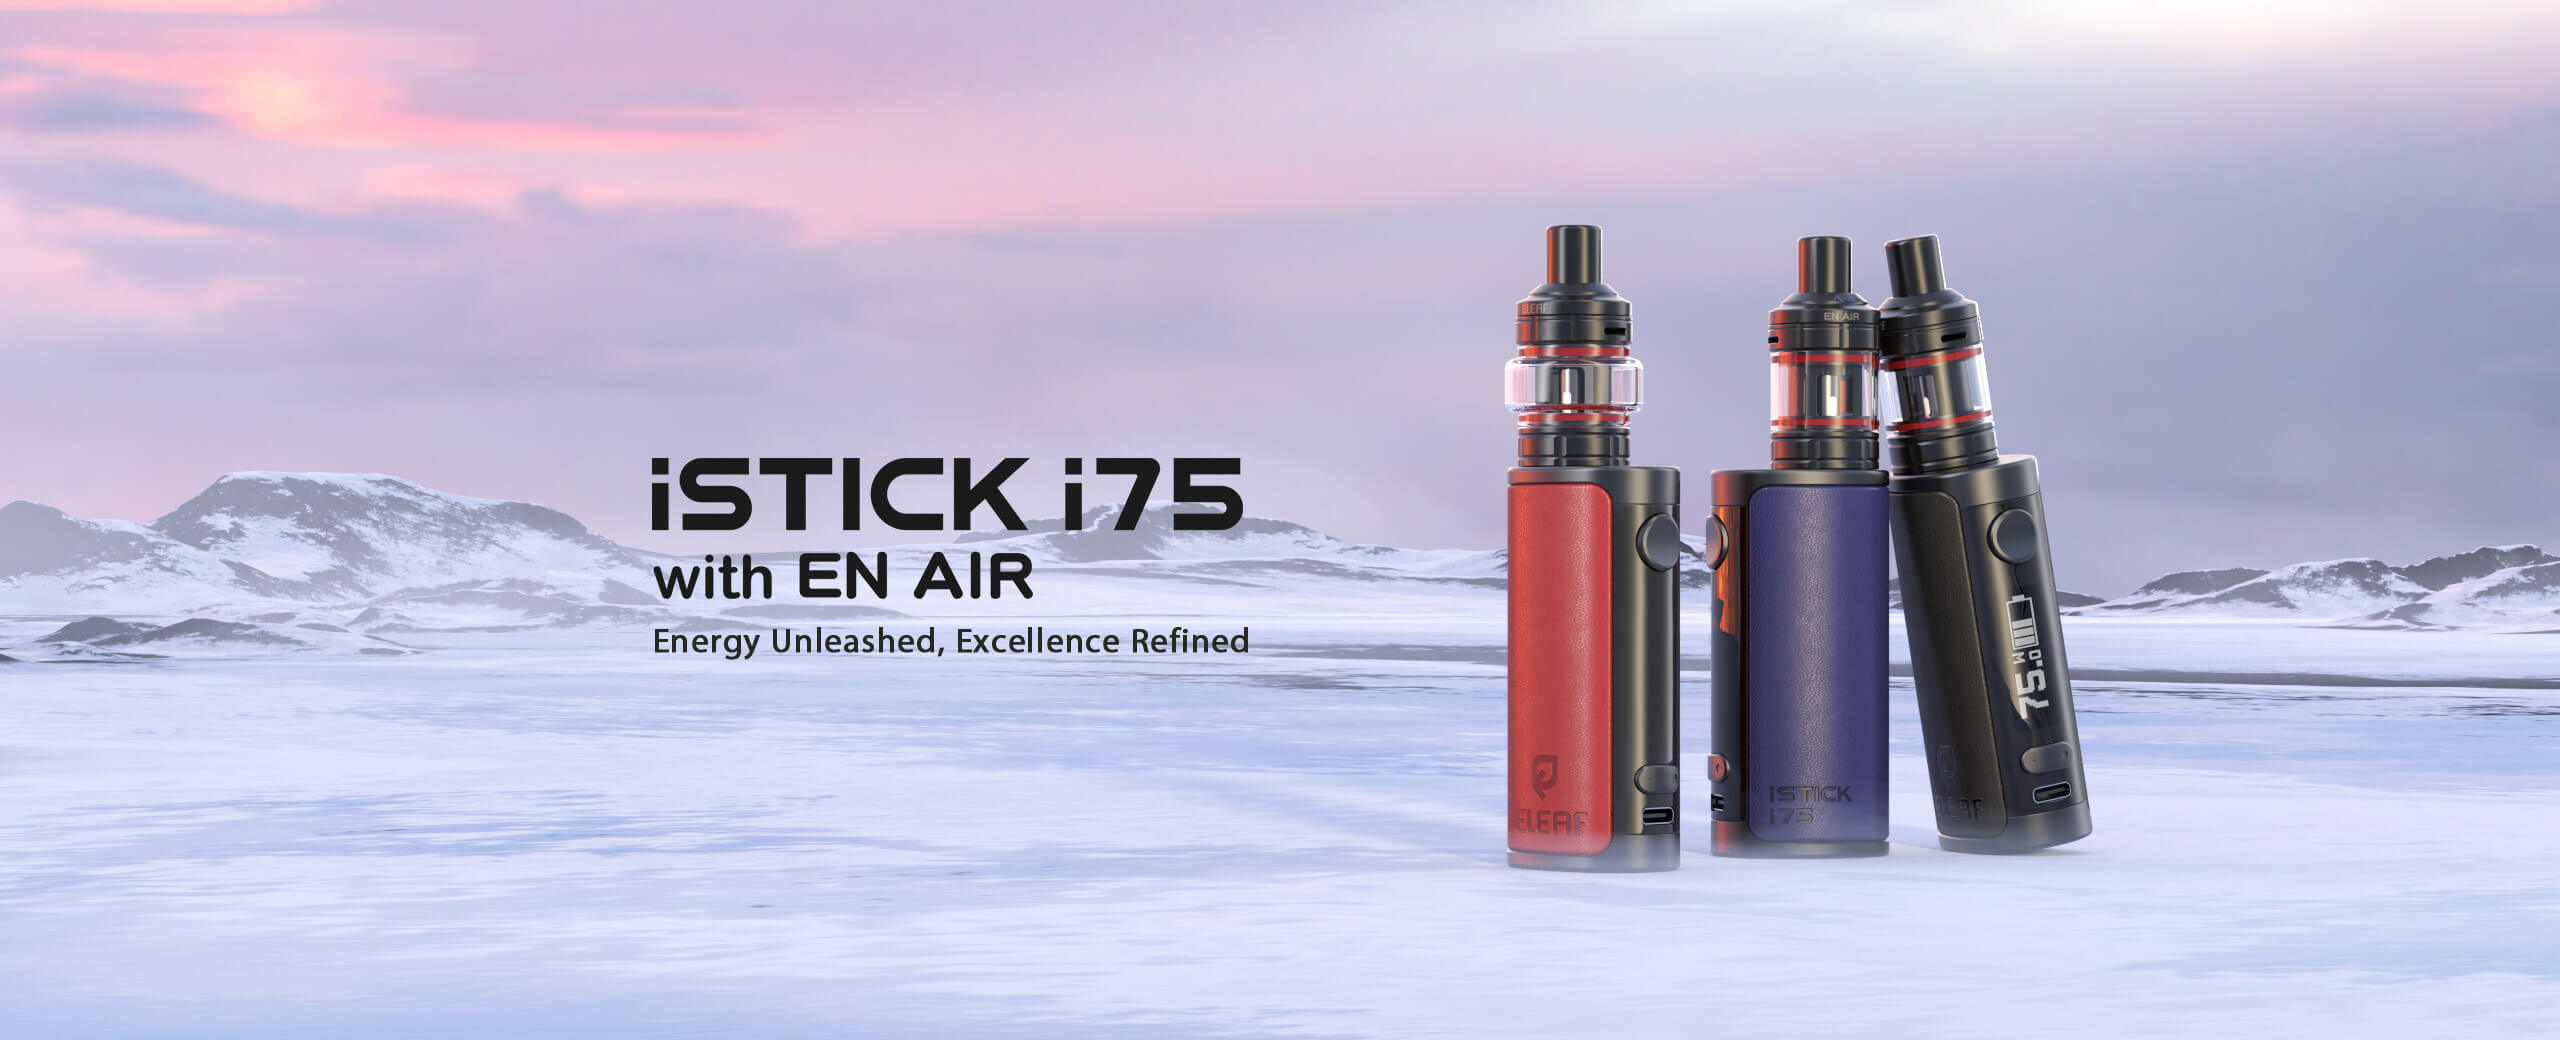 iSTICK i75 with EN AIR